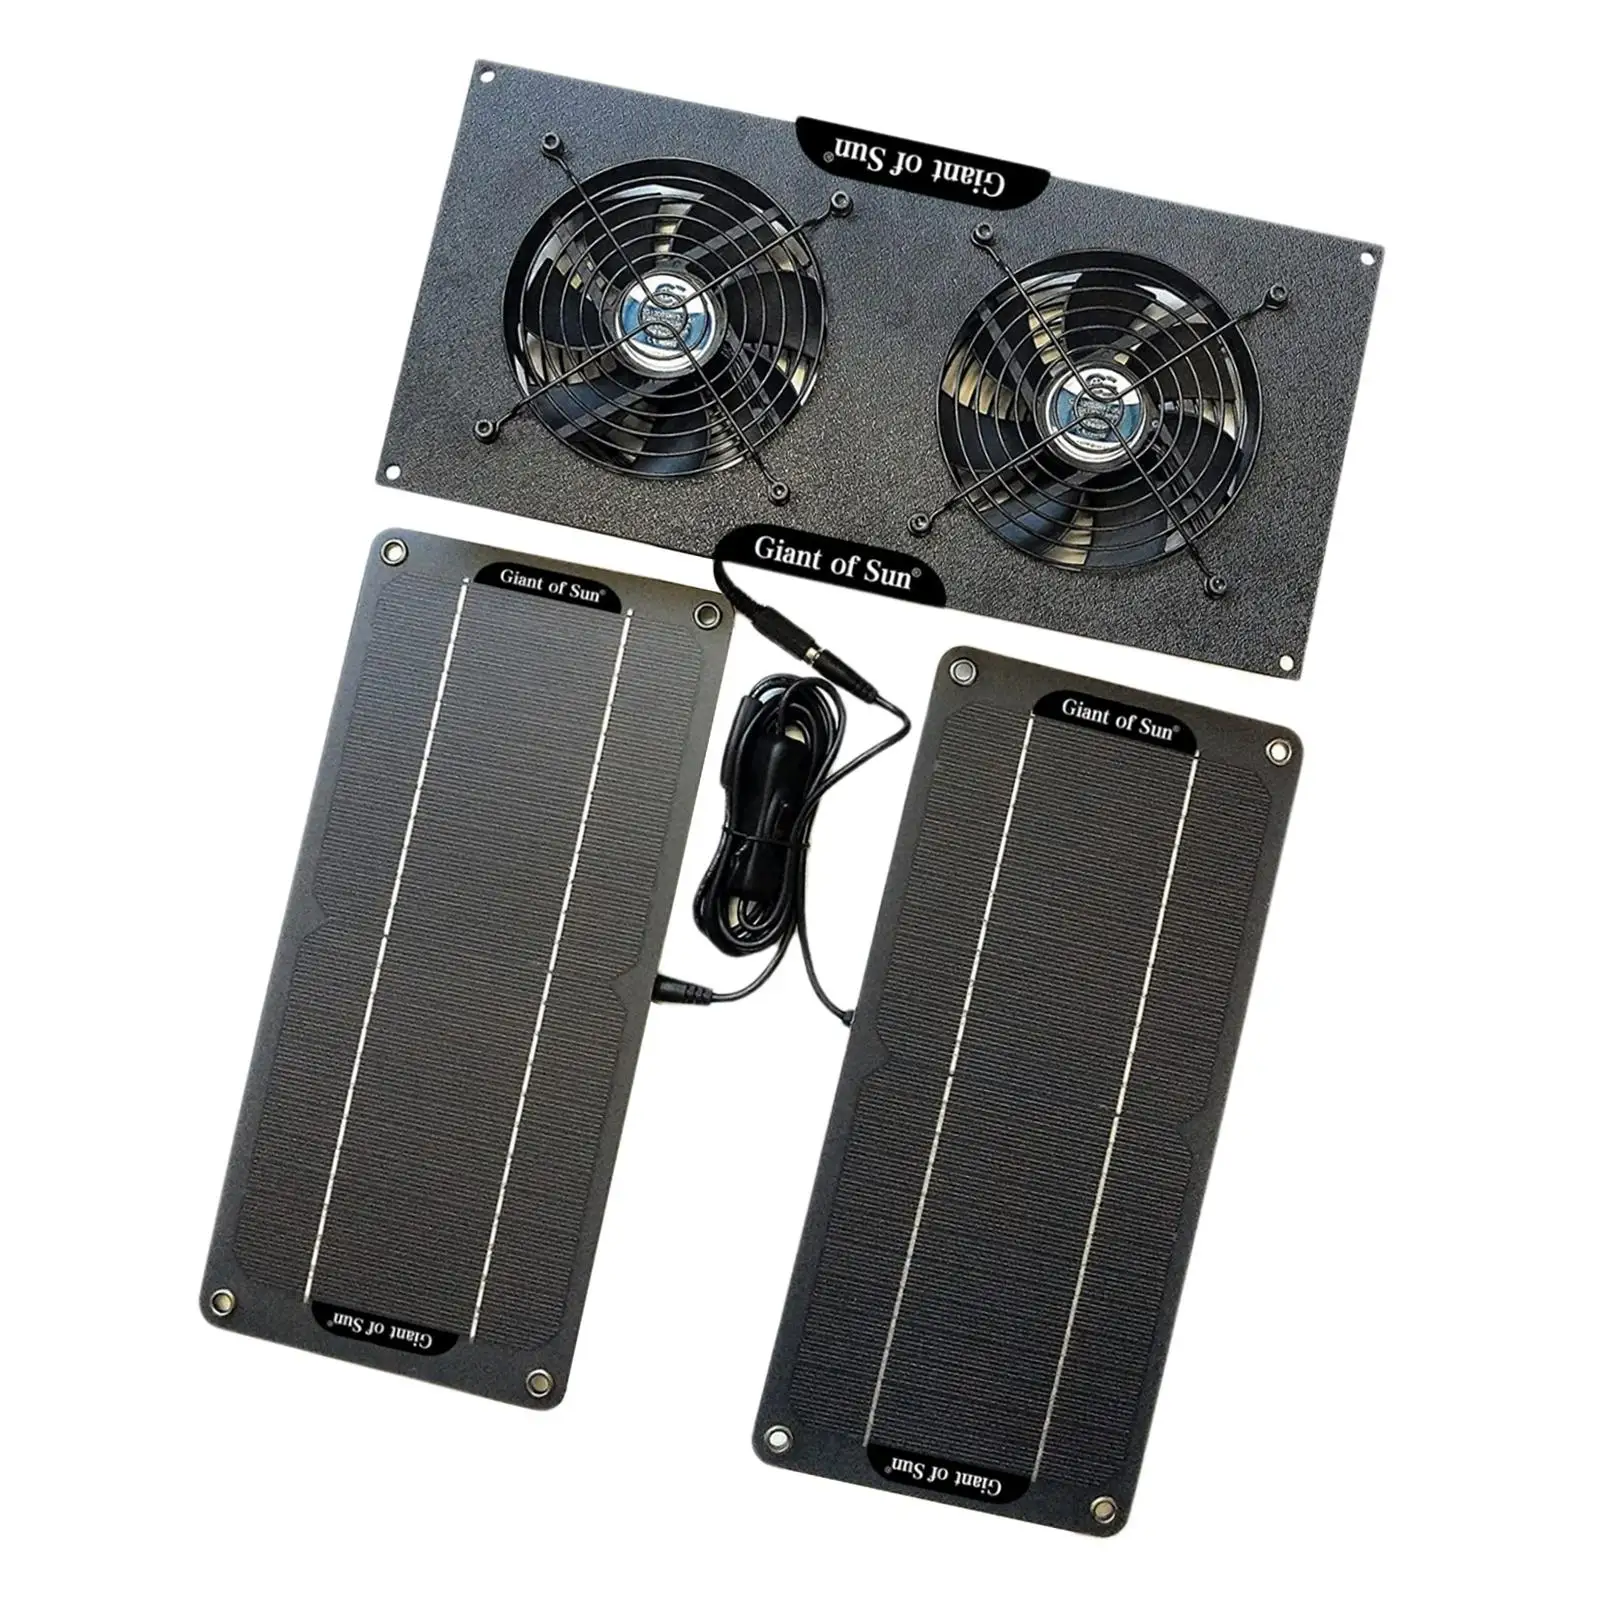 100W Solar Powered Dual Fan Kit for Small Chicken Coops, Greenhouses, Doghouses, Sheds, and Other Enclosures